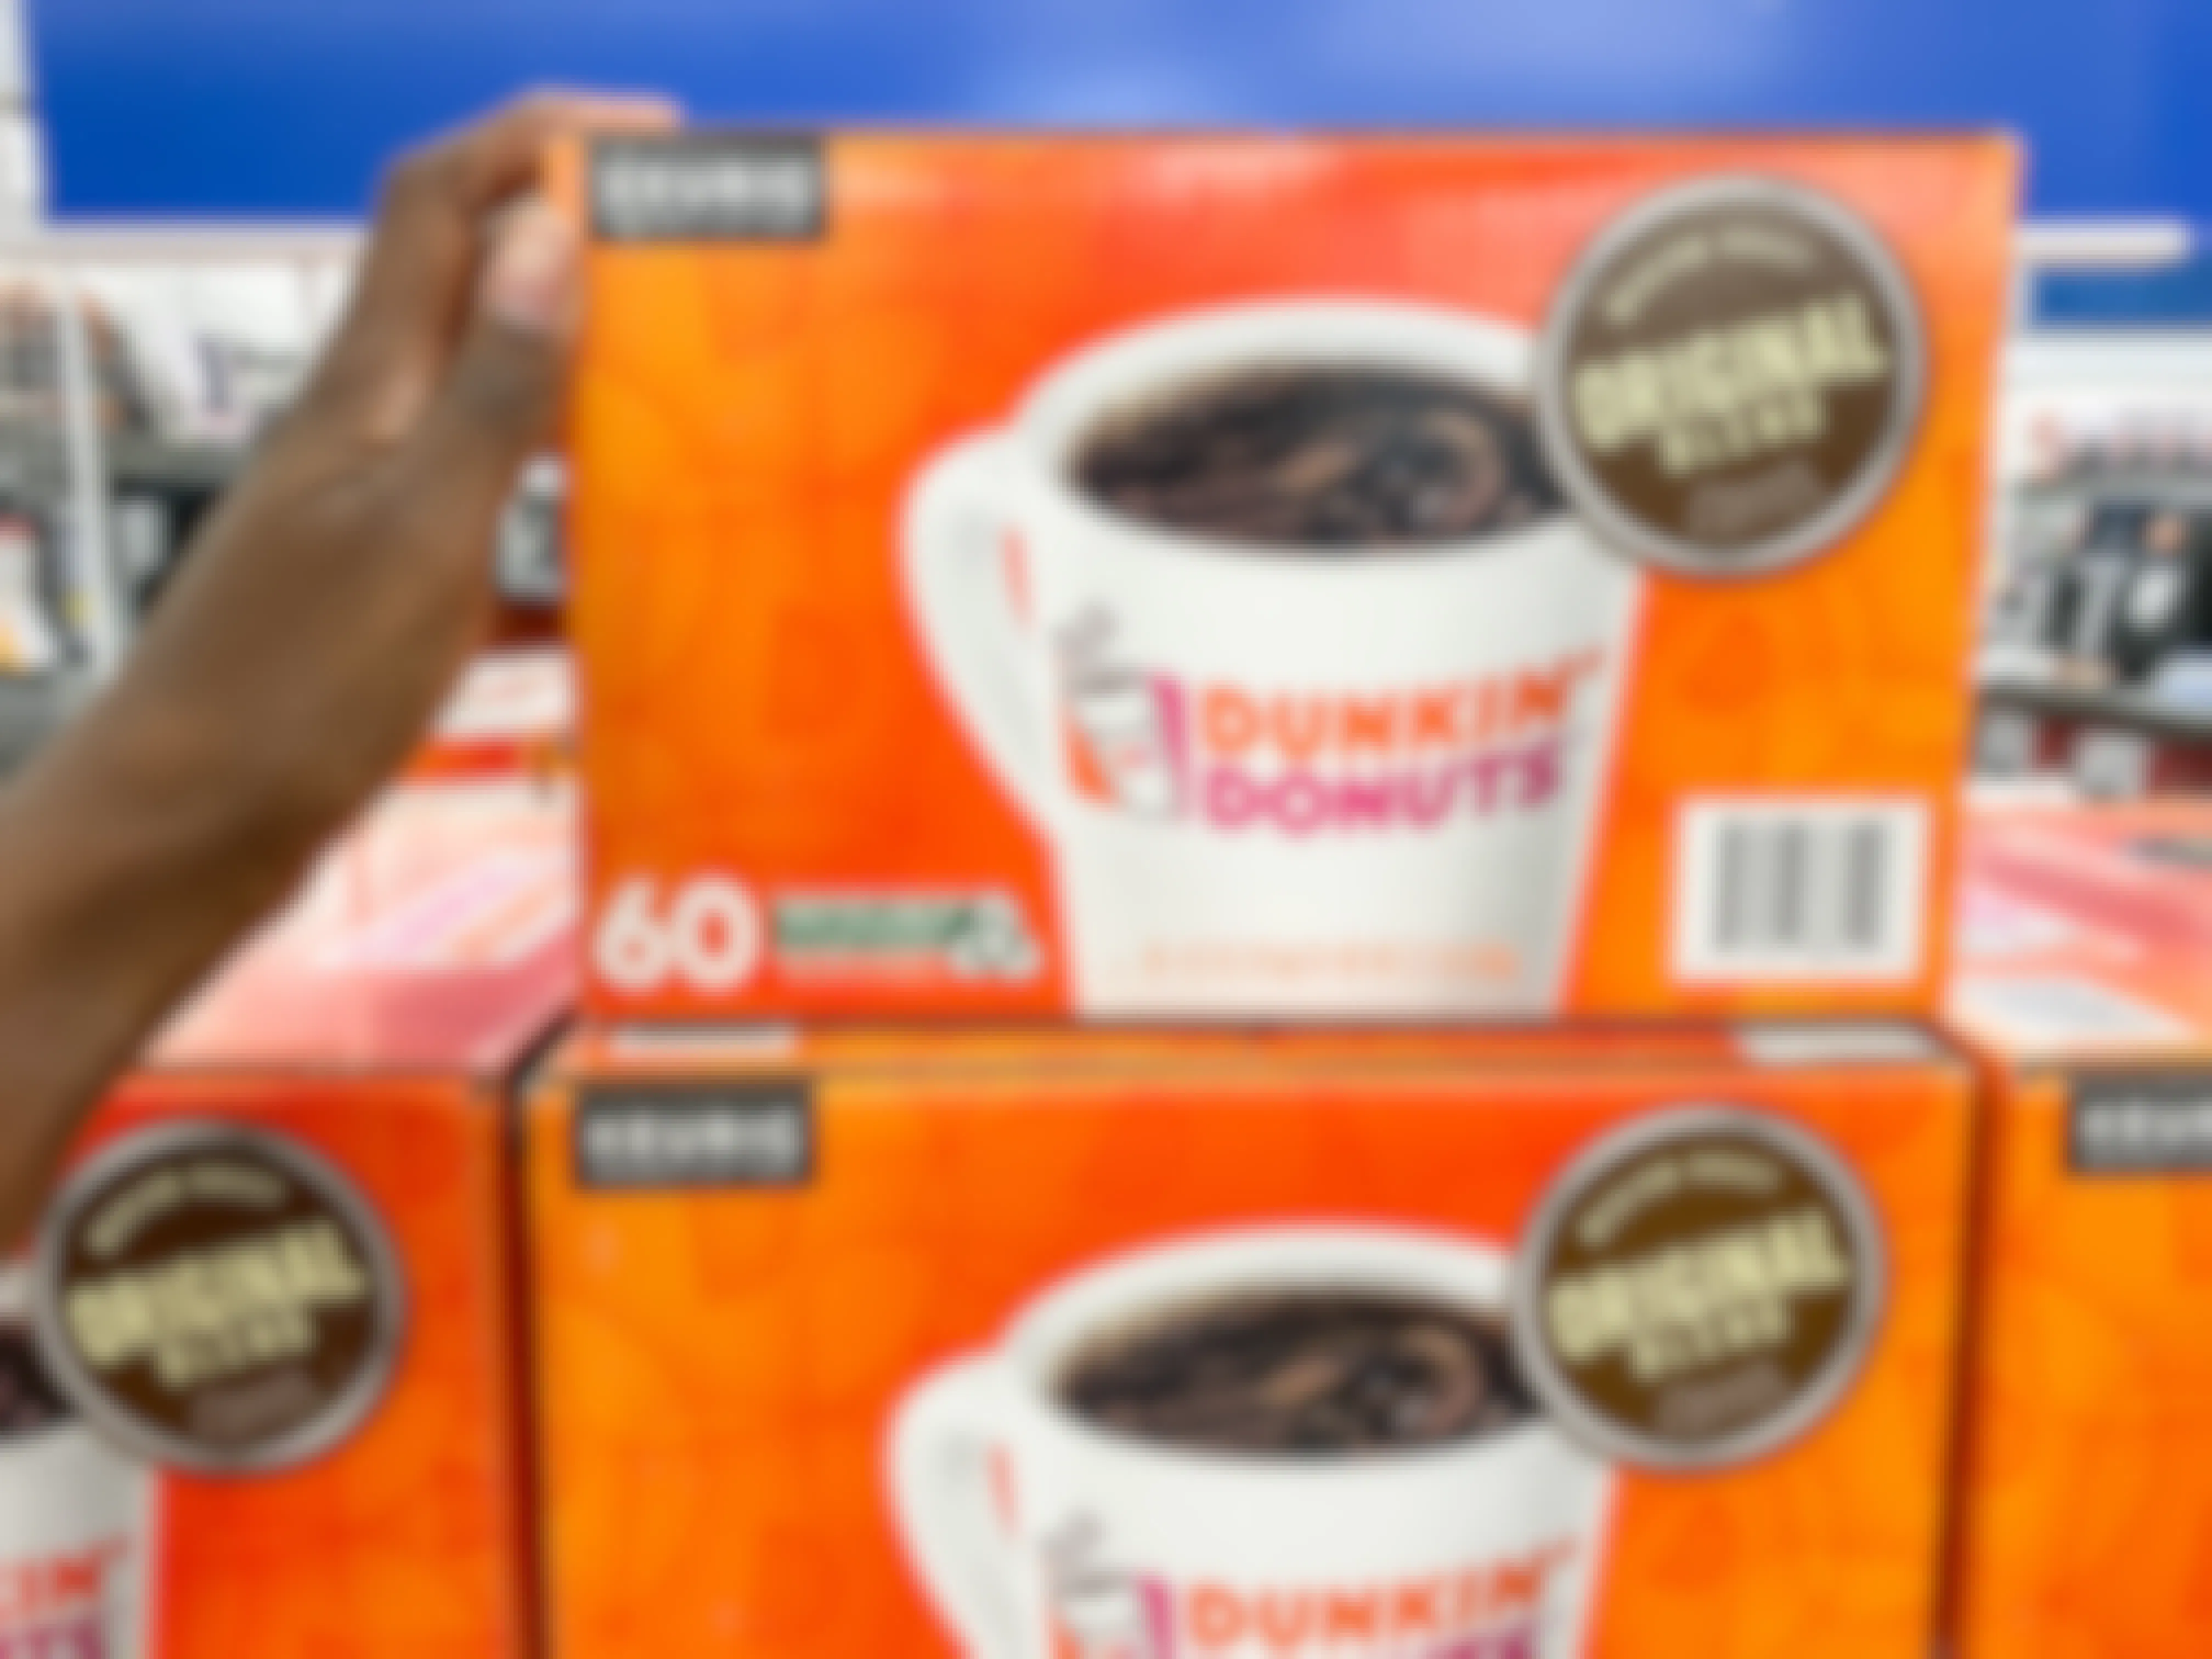 a box of Keurig dunking donuts k-cups on top of another box in bed bath and beyond